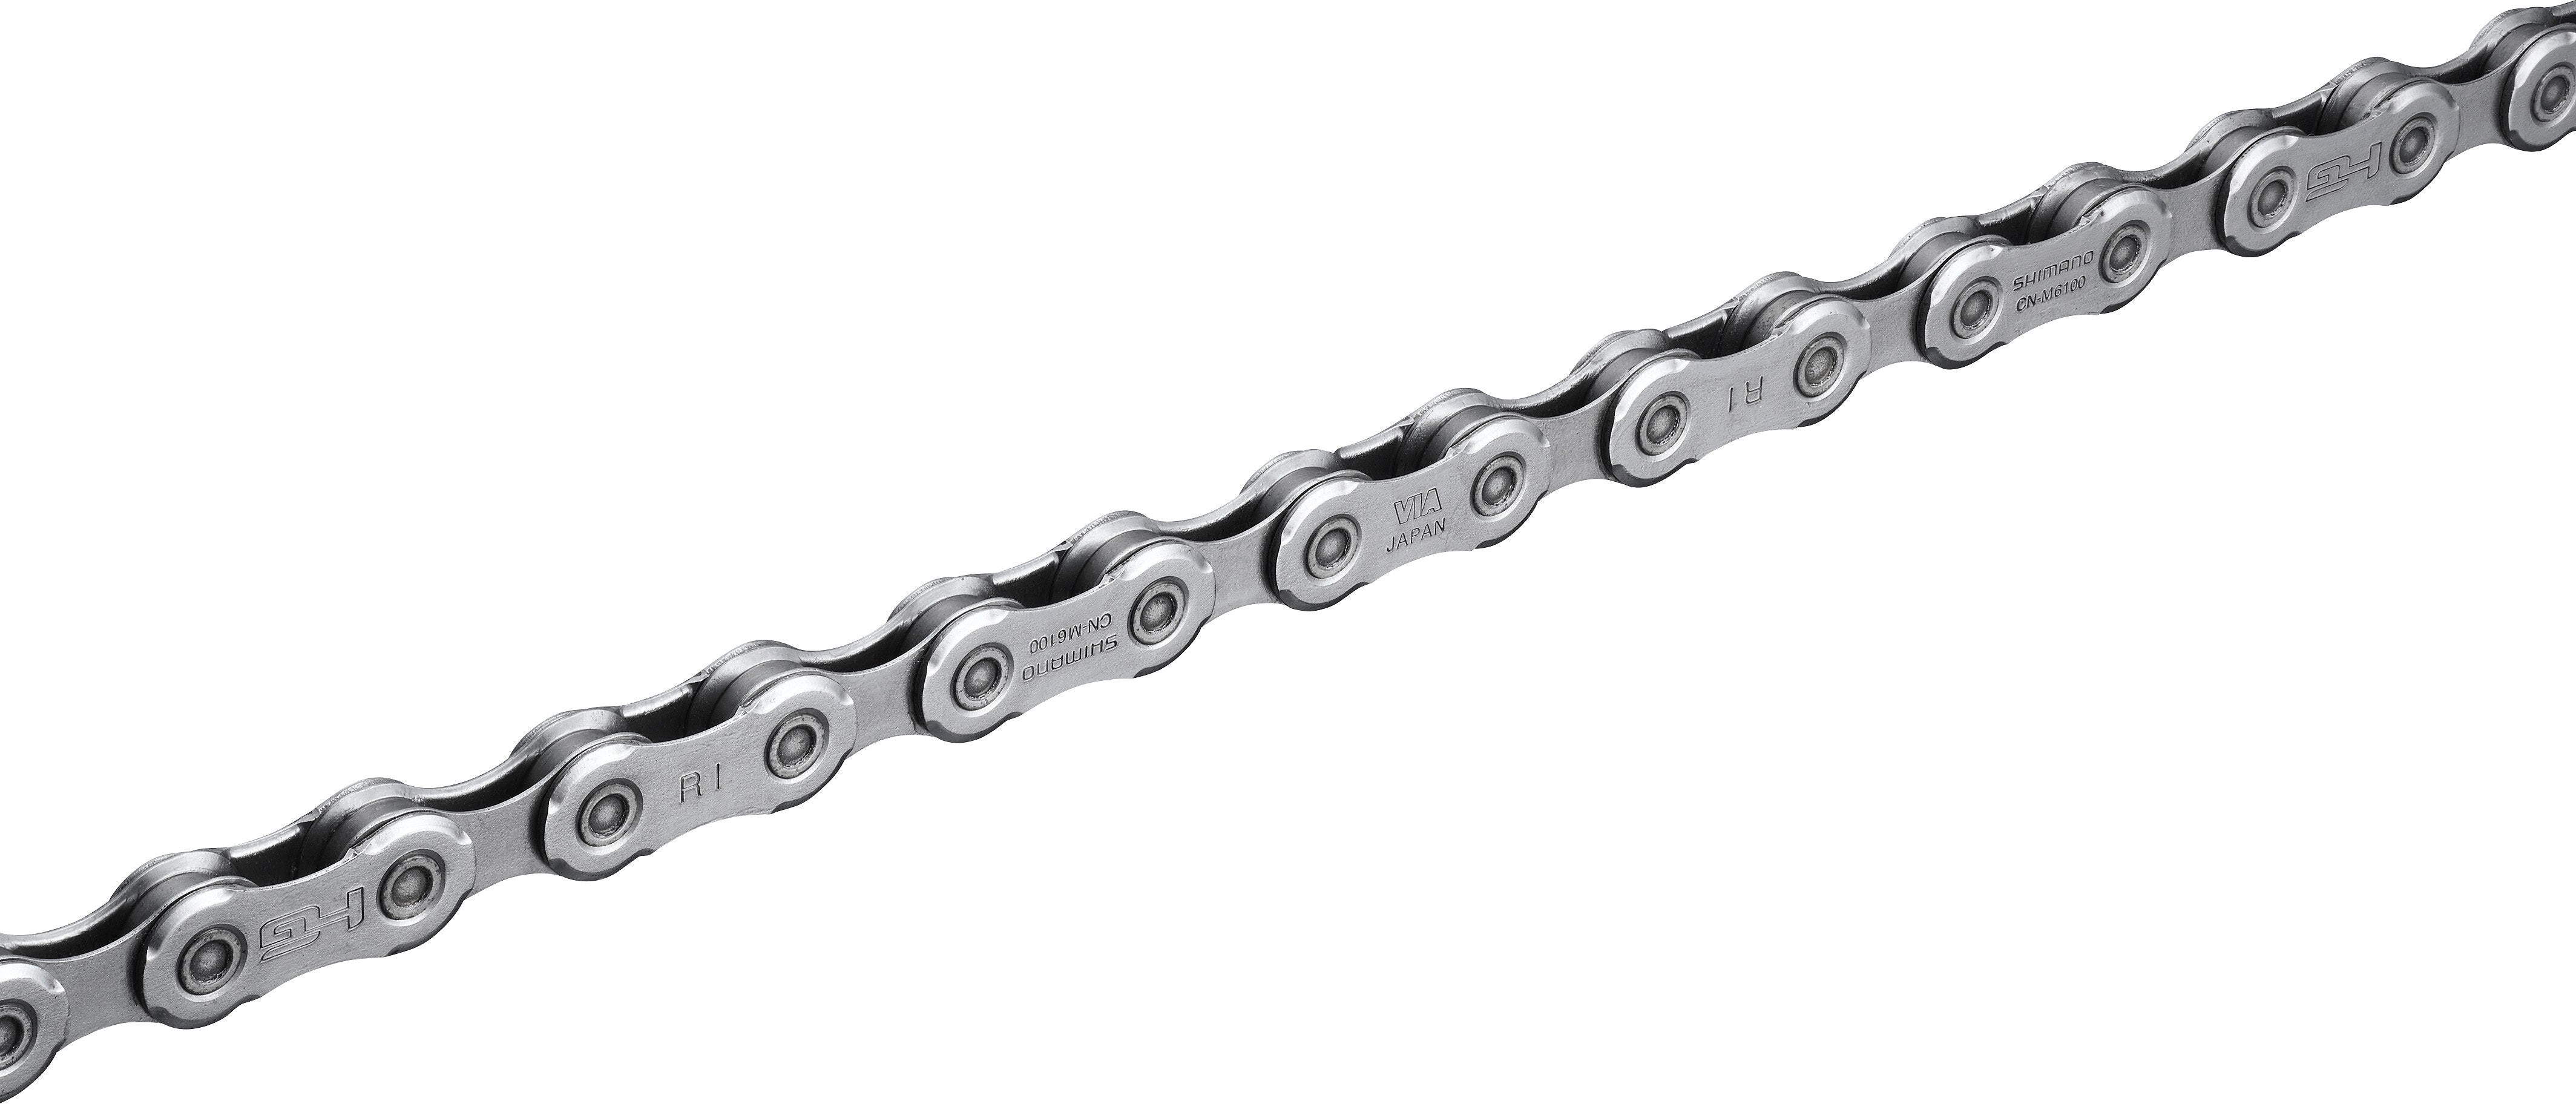 Shimano Deore CN-M6100 12 Speed Chain 138 Links